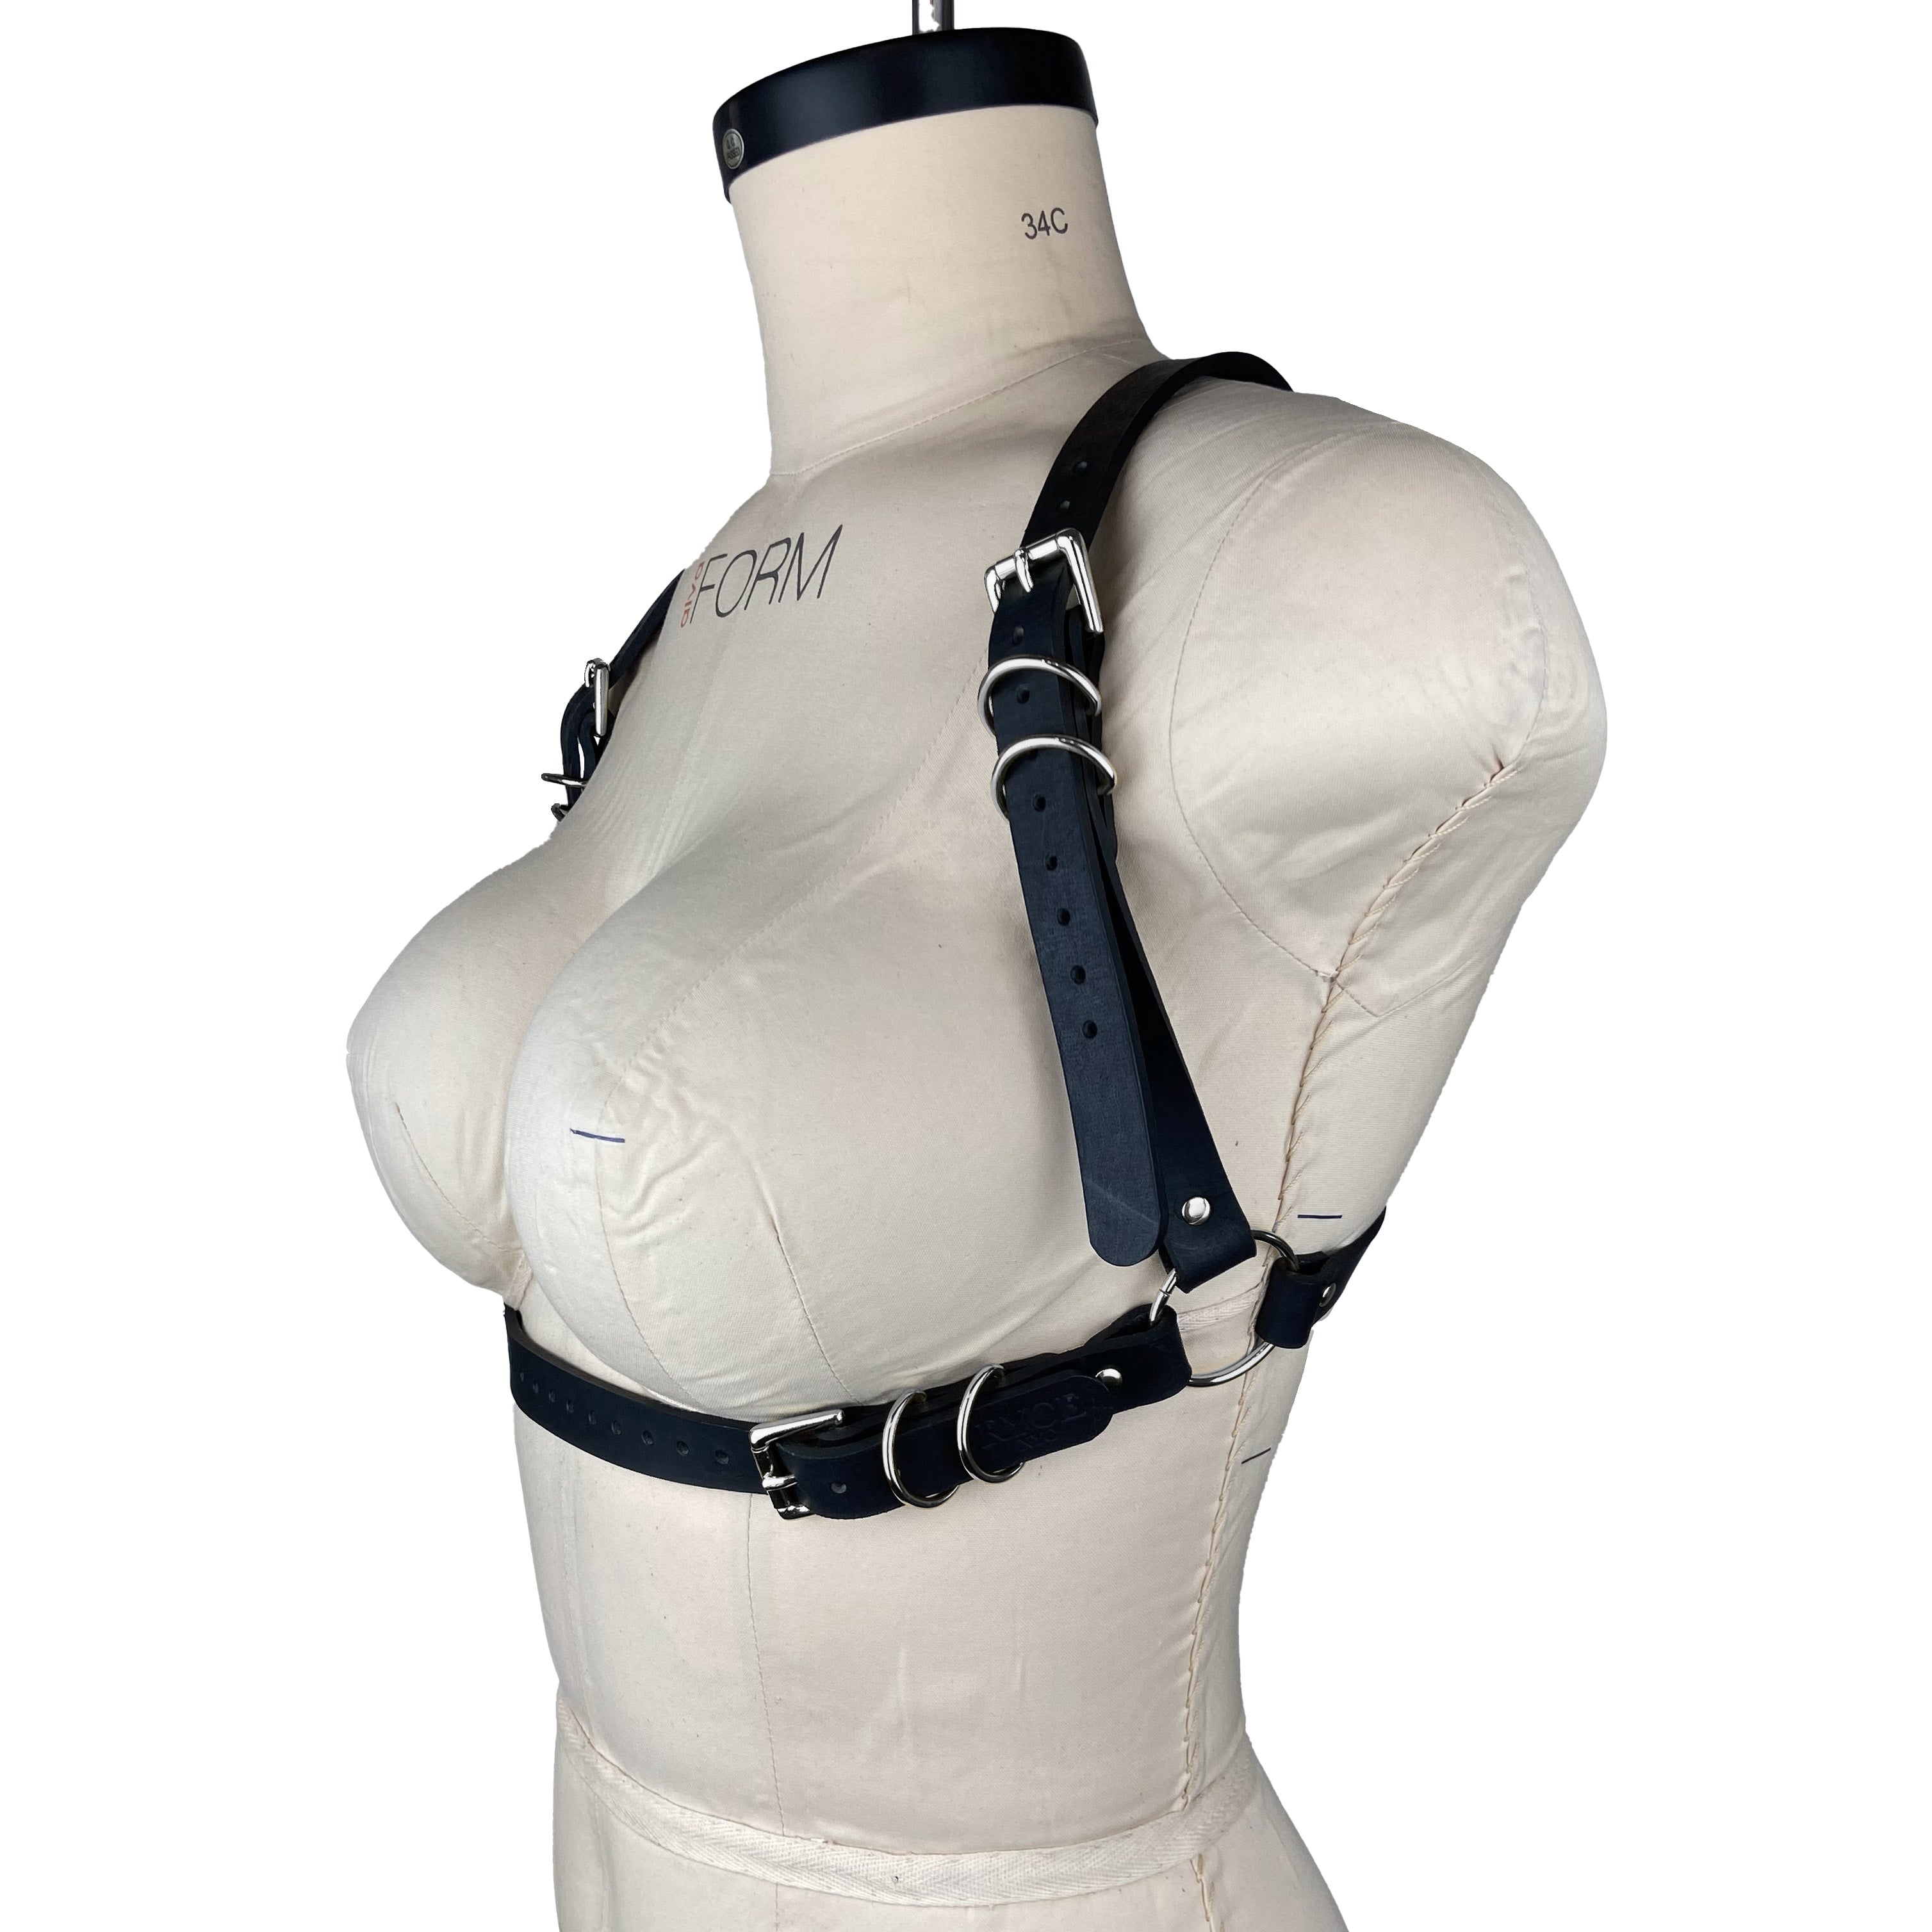 luxury Italian leather fashion and fetish women's men's gemma harness, bespoke, made-to-order in nyc, side view